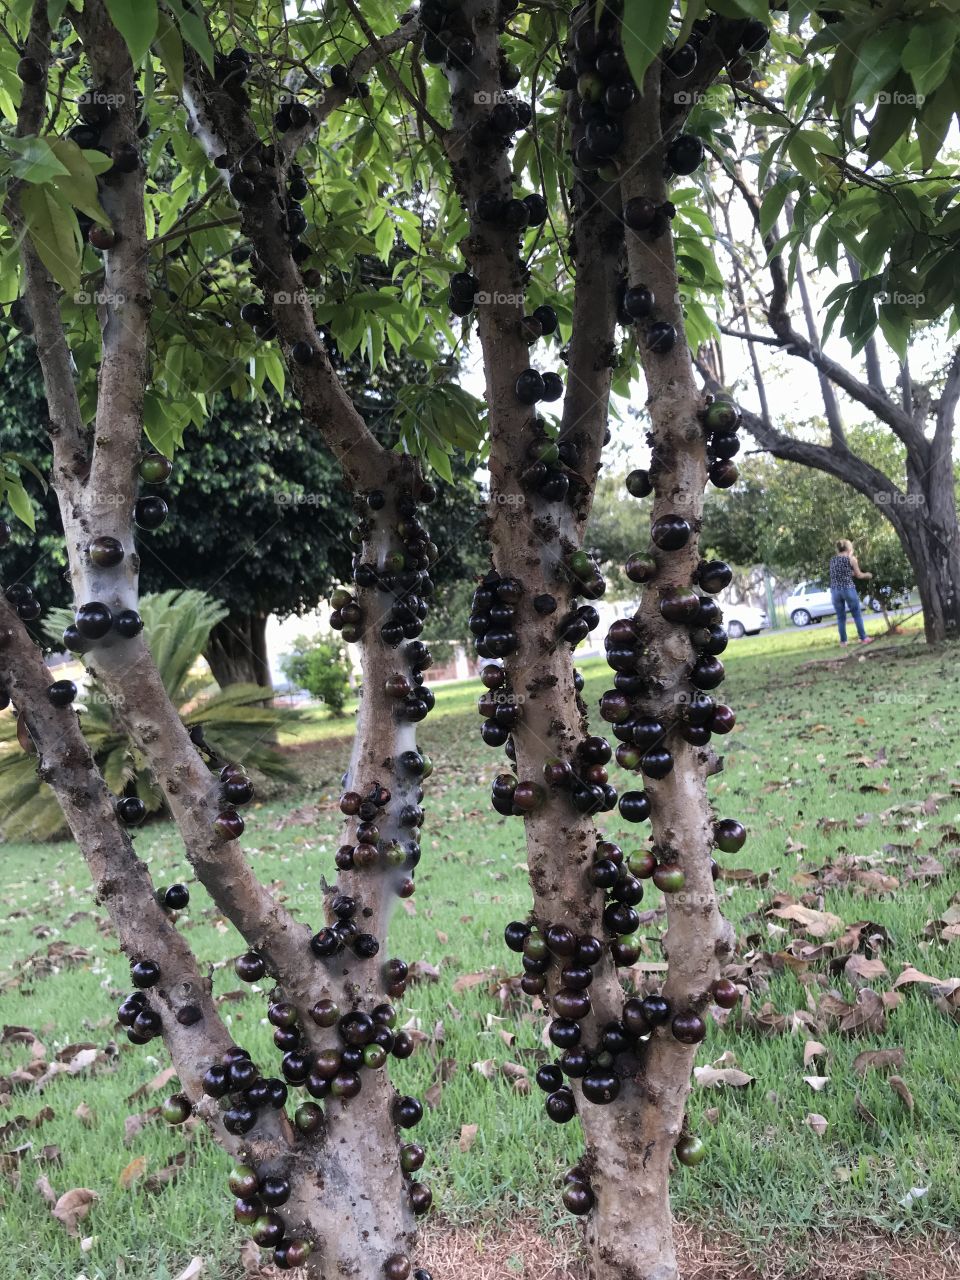 Jabuticaba is Brazilian fruit, similar to blackberry, but with totally different flavor.